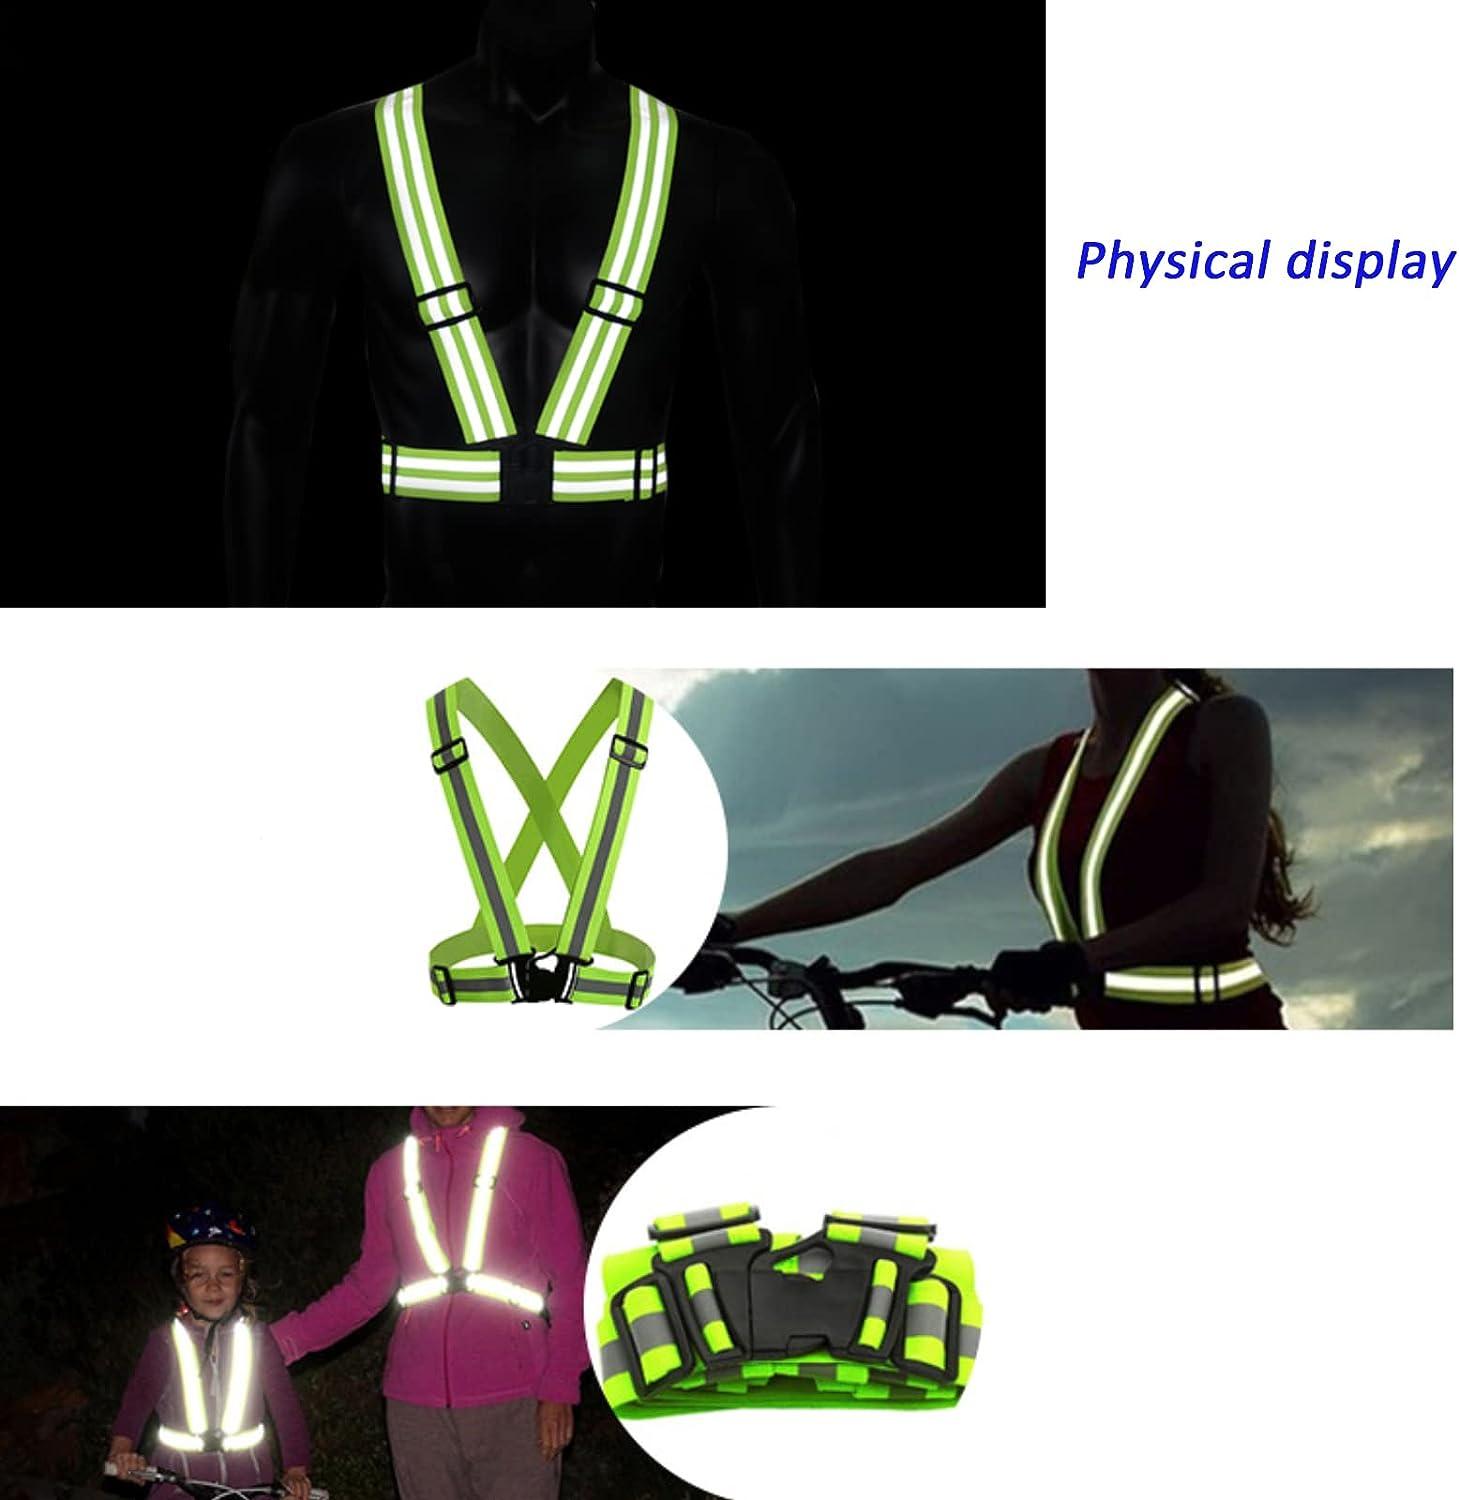 The 6 Best Reflective Bands 2022 - Reflective Arm and Leg Bands